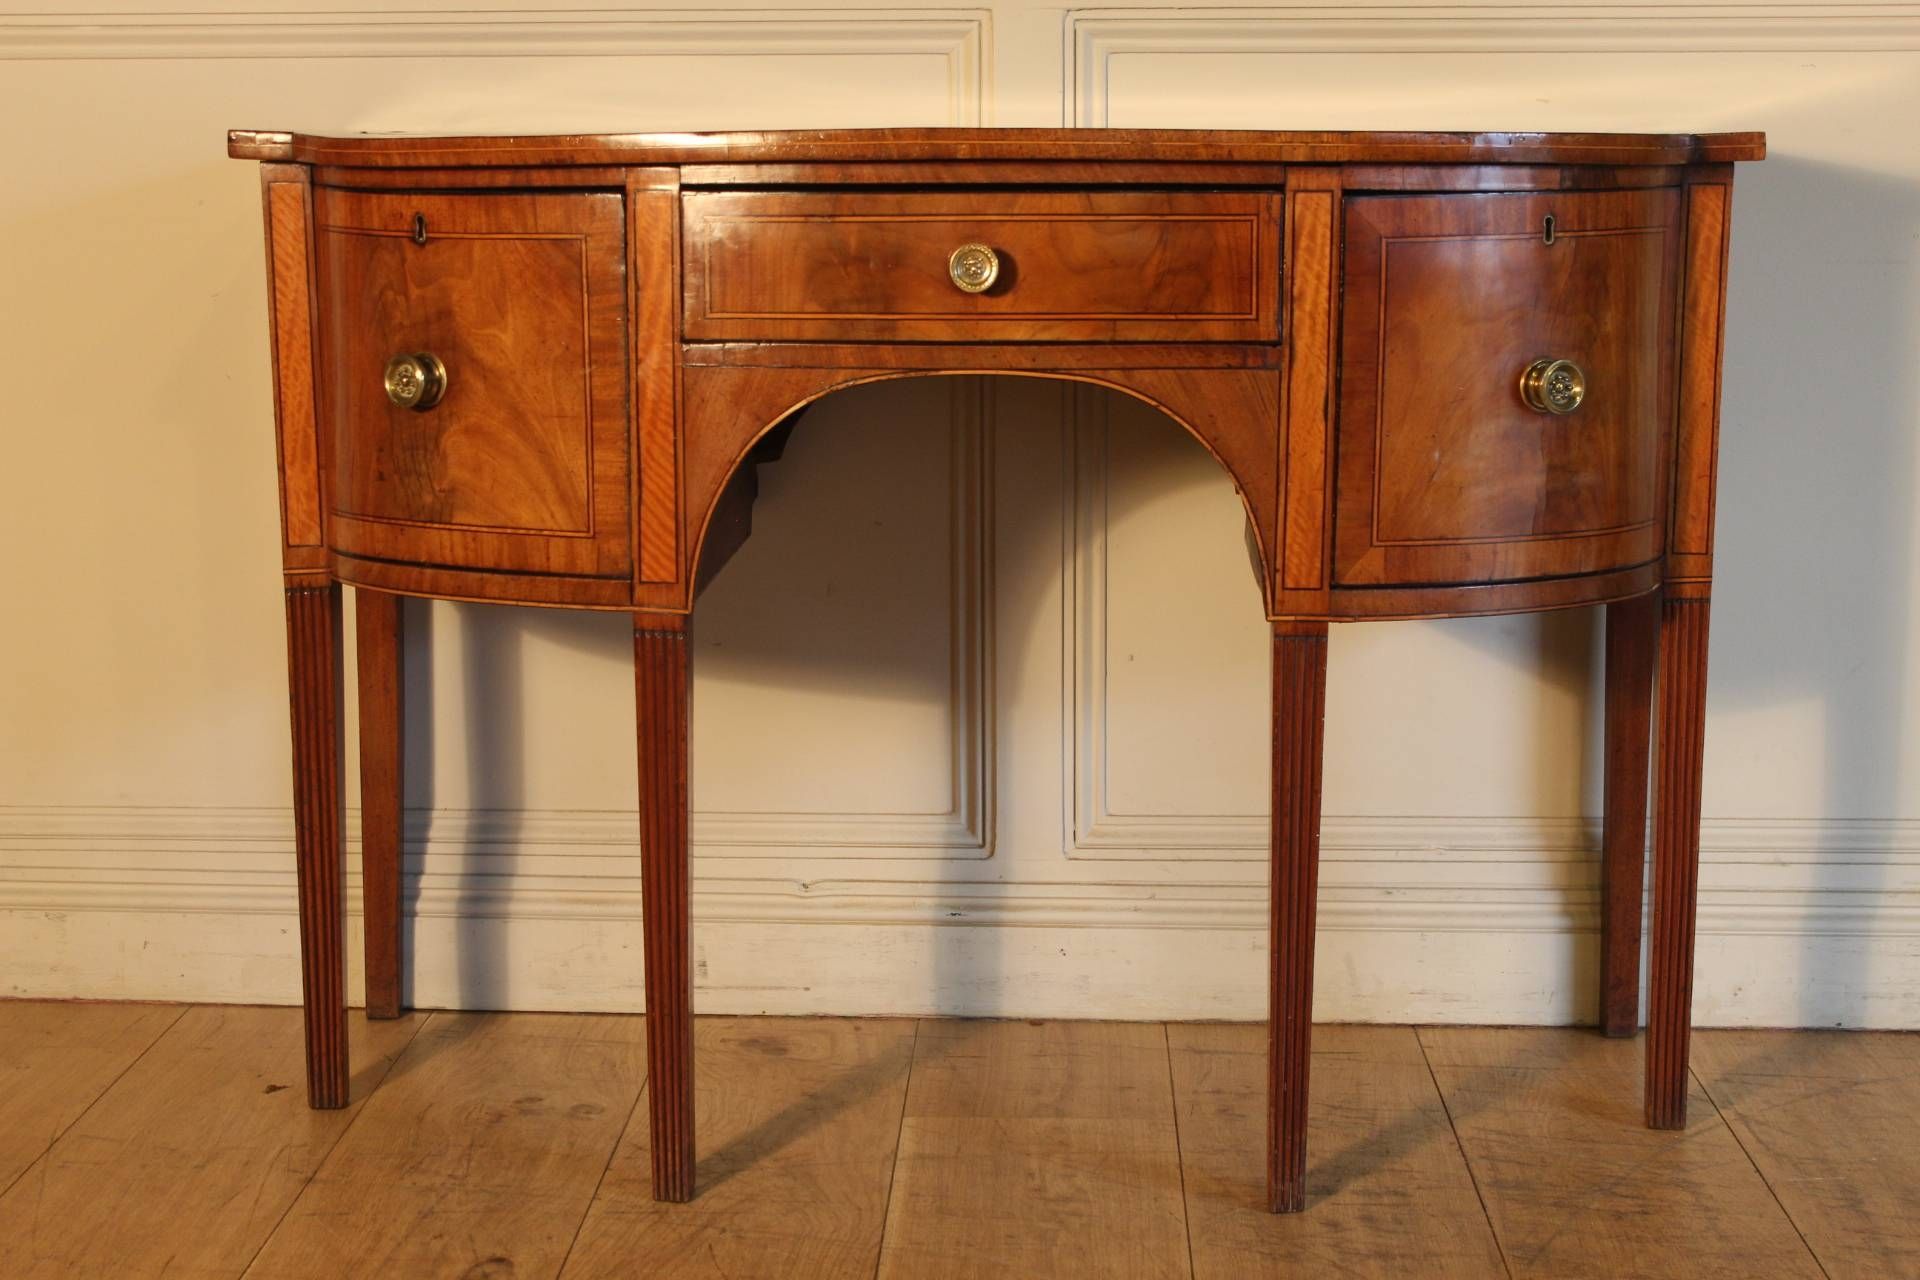 Antique Sideboards – Antique Chiffonier – Mahogany Sideboards With Regard To Mahogany Sideboards (View 11 of 15)